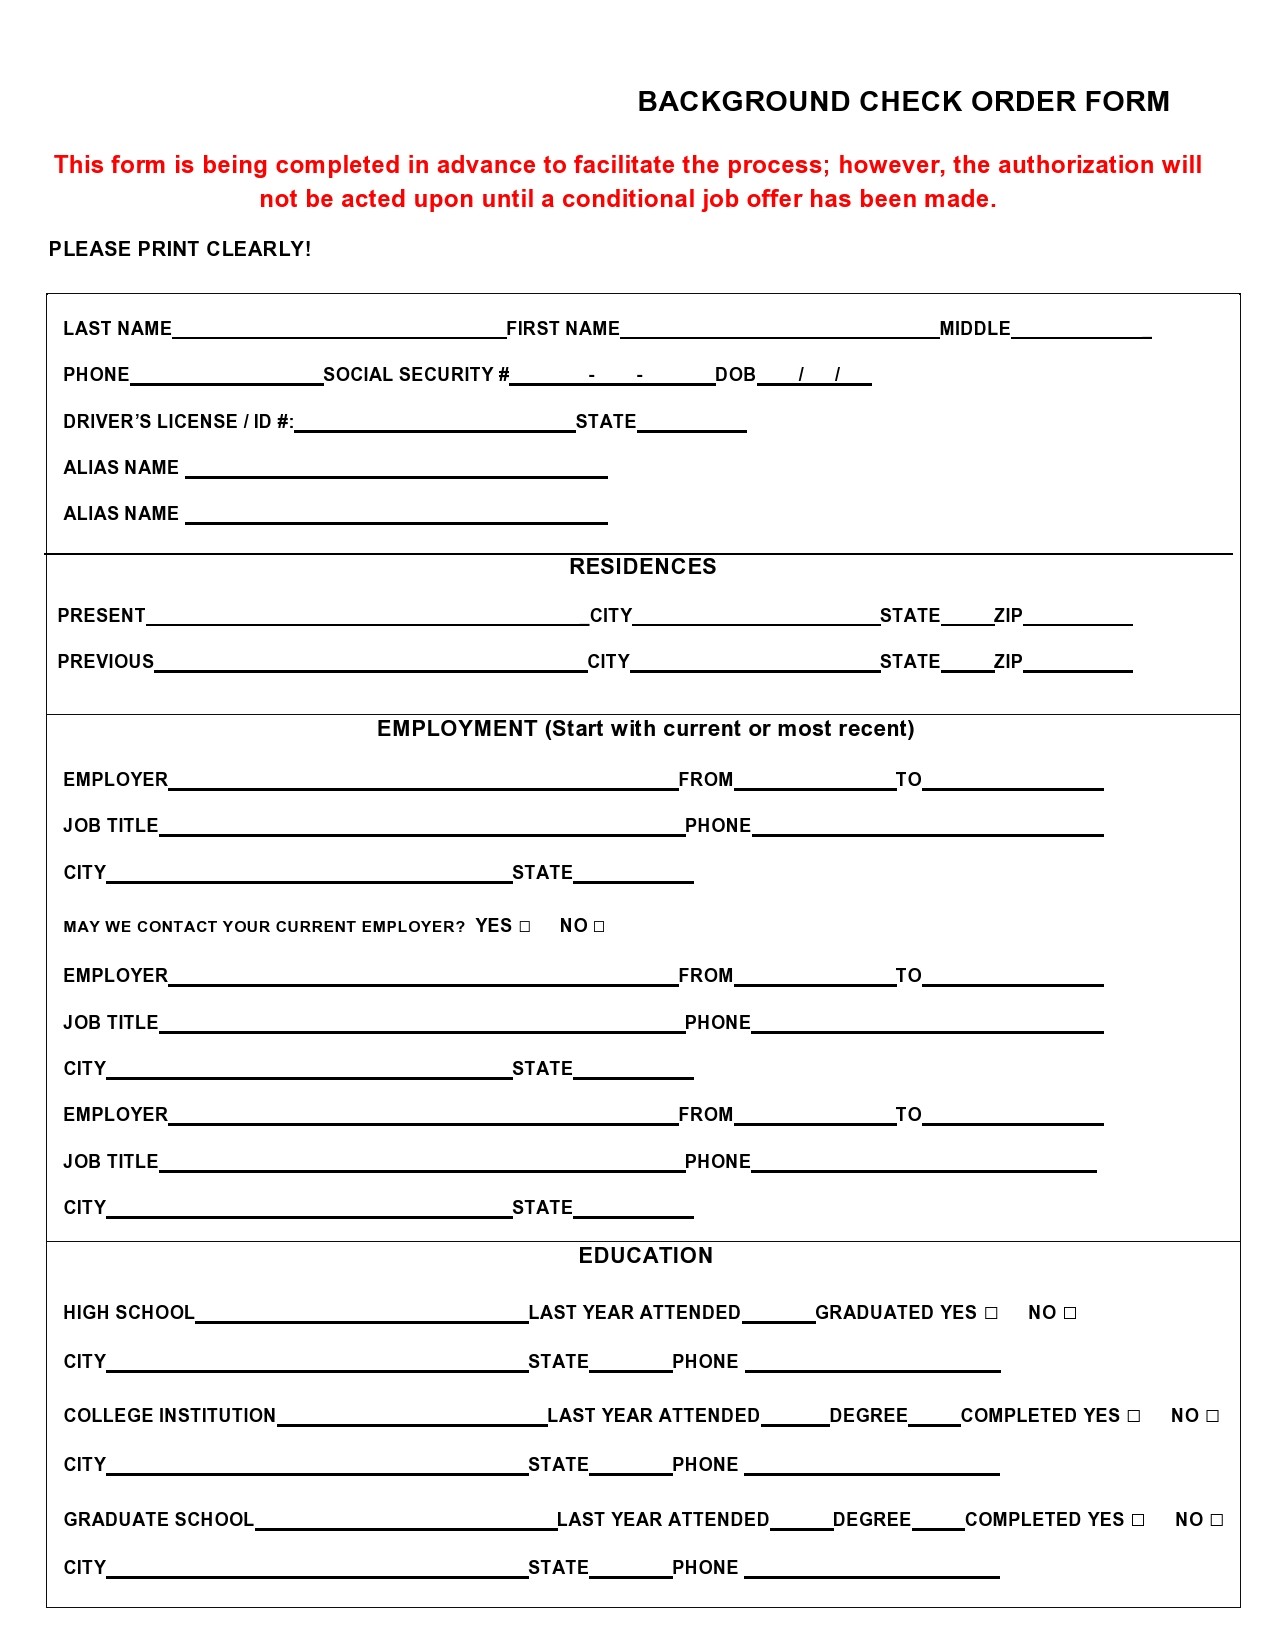 Free background check form 38